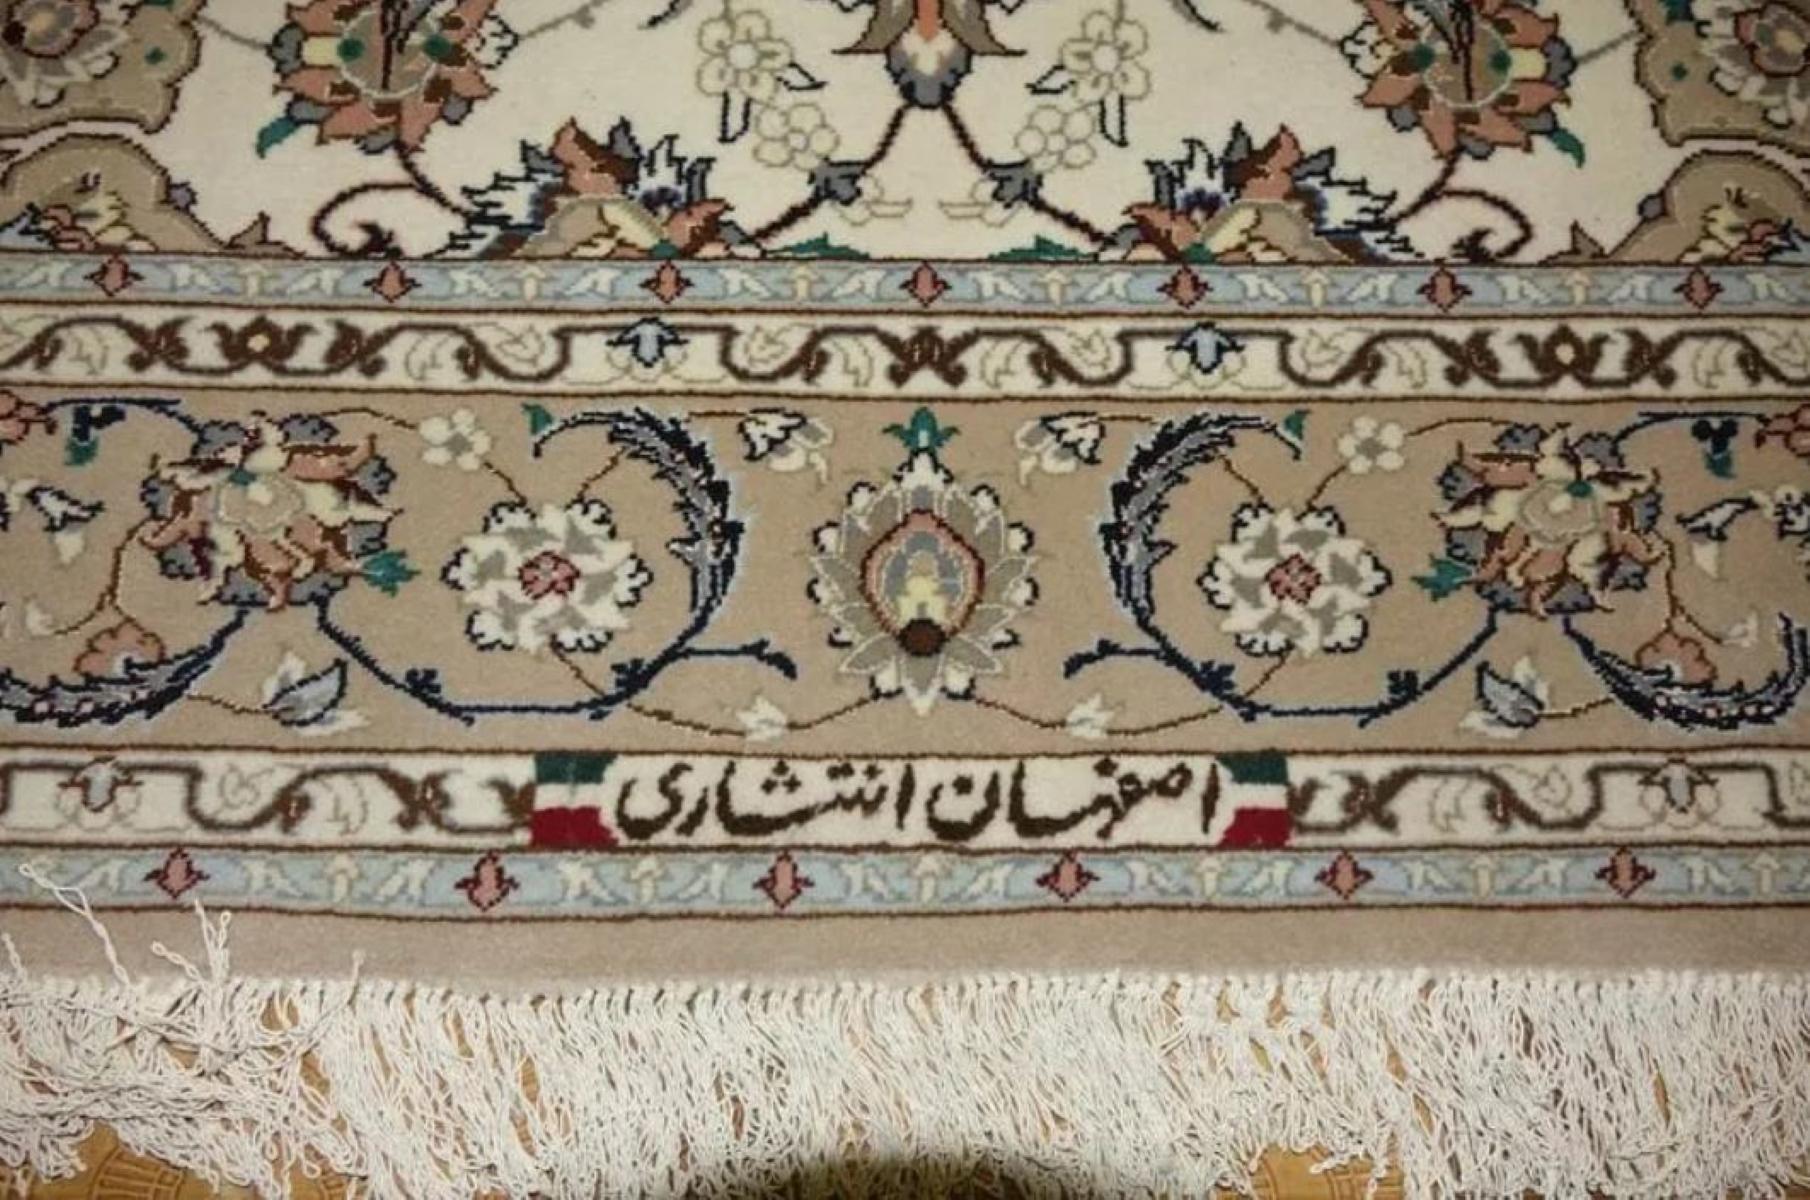 Very fine Persian Isfahan Silk & Wool Rug - 5' x 8' In Excellent Condition For Sale In Newmanstown, PA